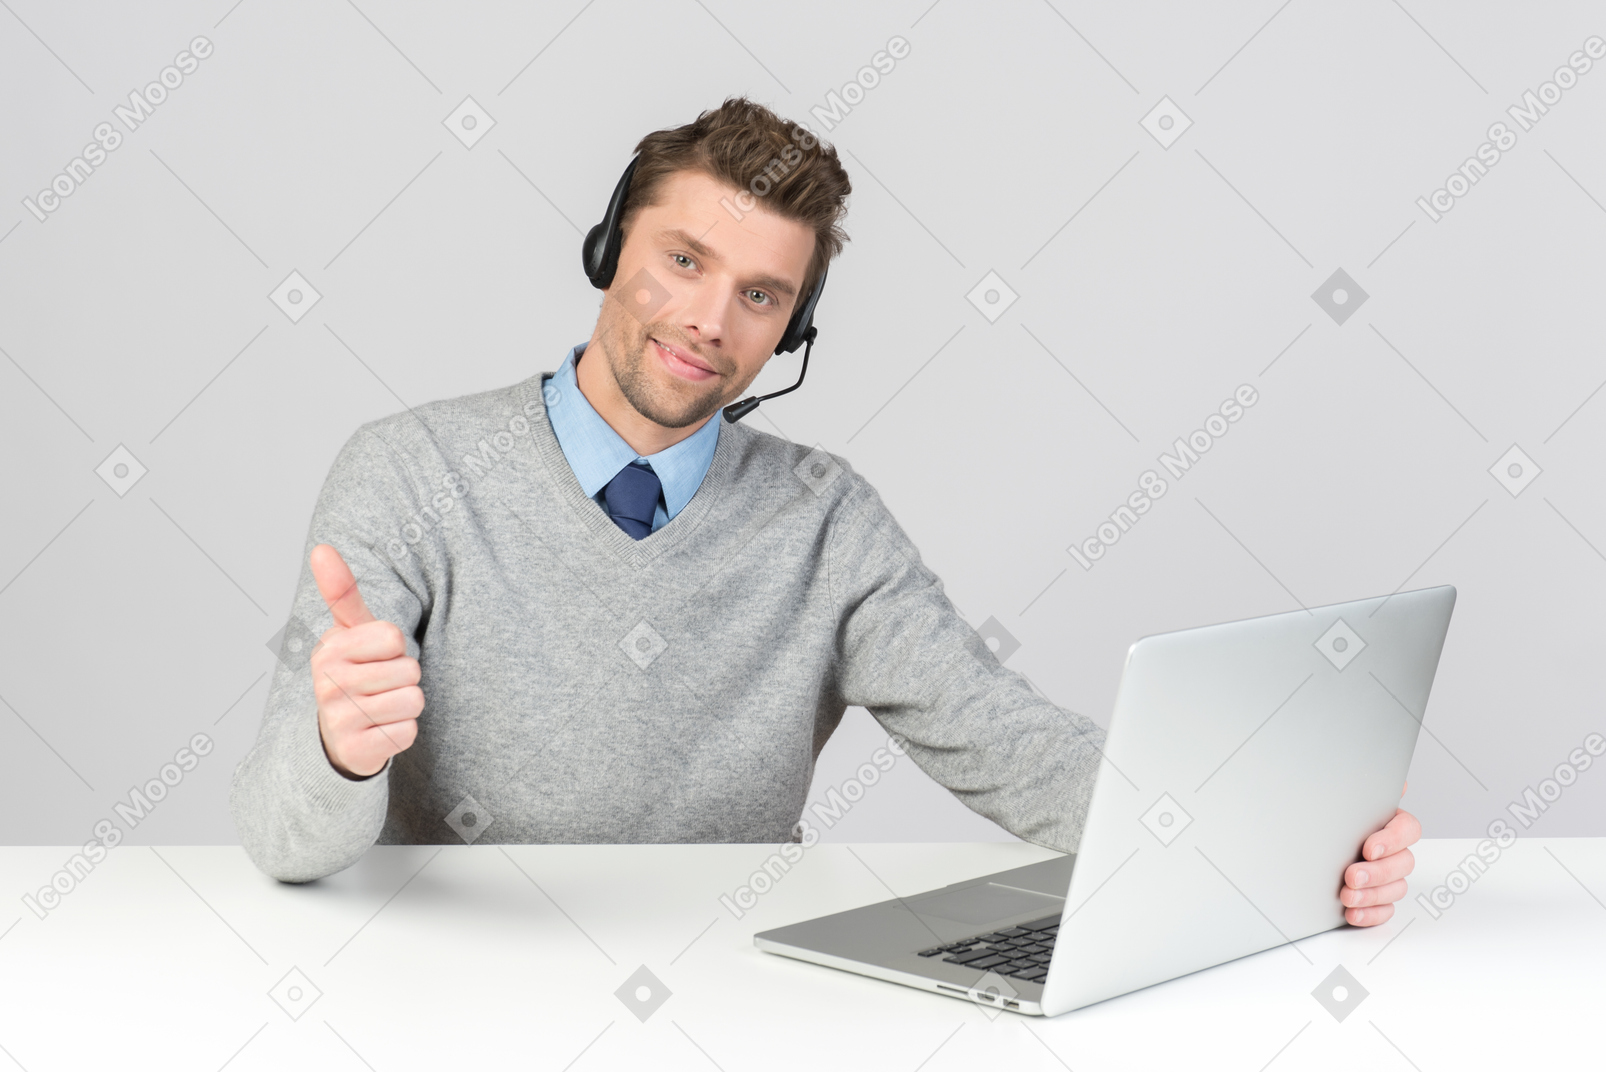 Call center agent sitting at the office desk and showing thumb up